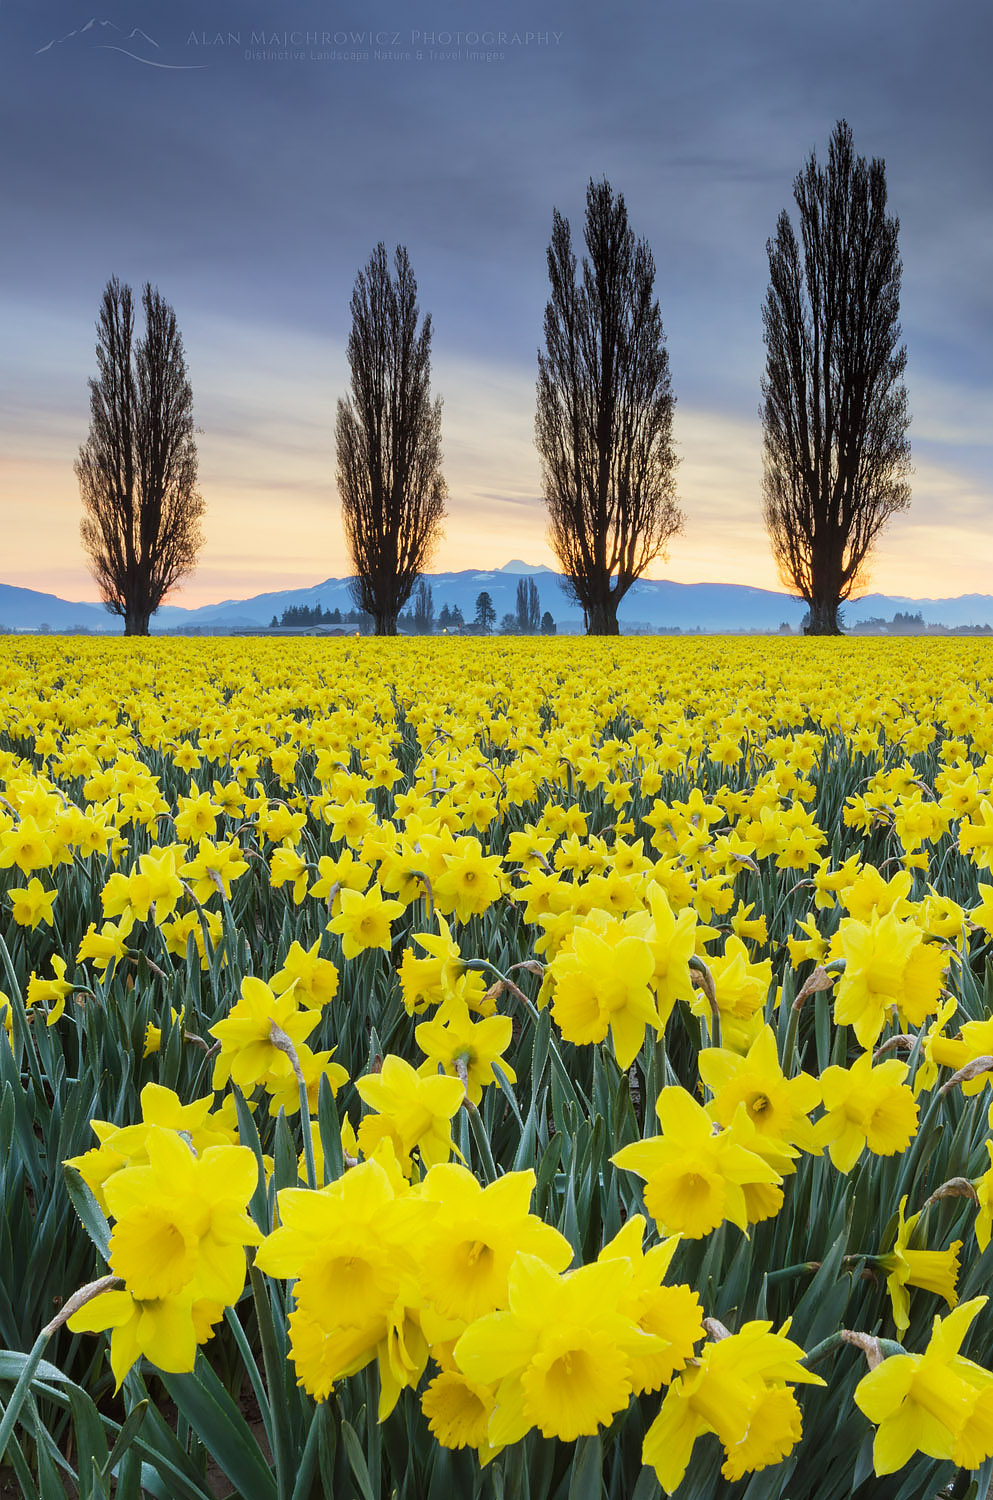 Fields of yellow daffodils in late March, Skagit Valley, Washington #61959b